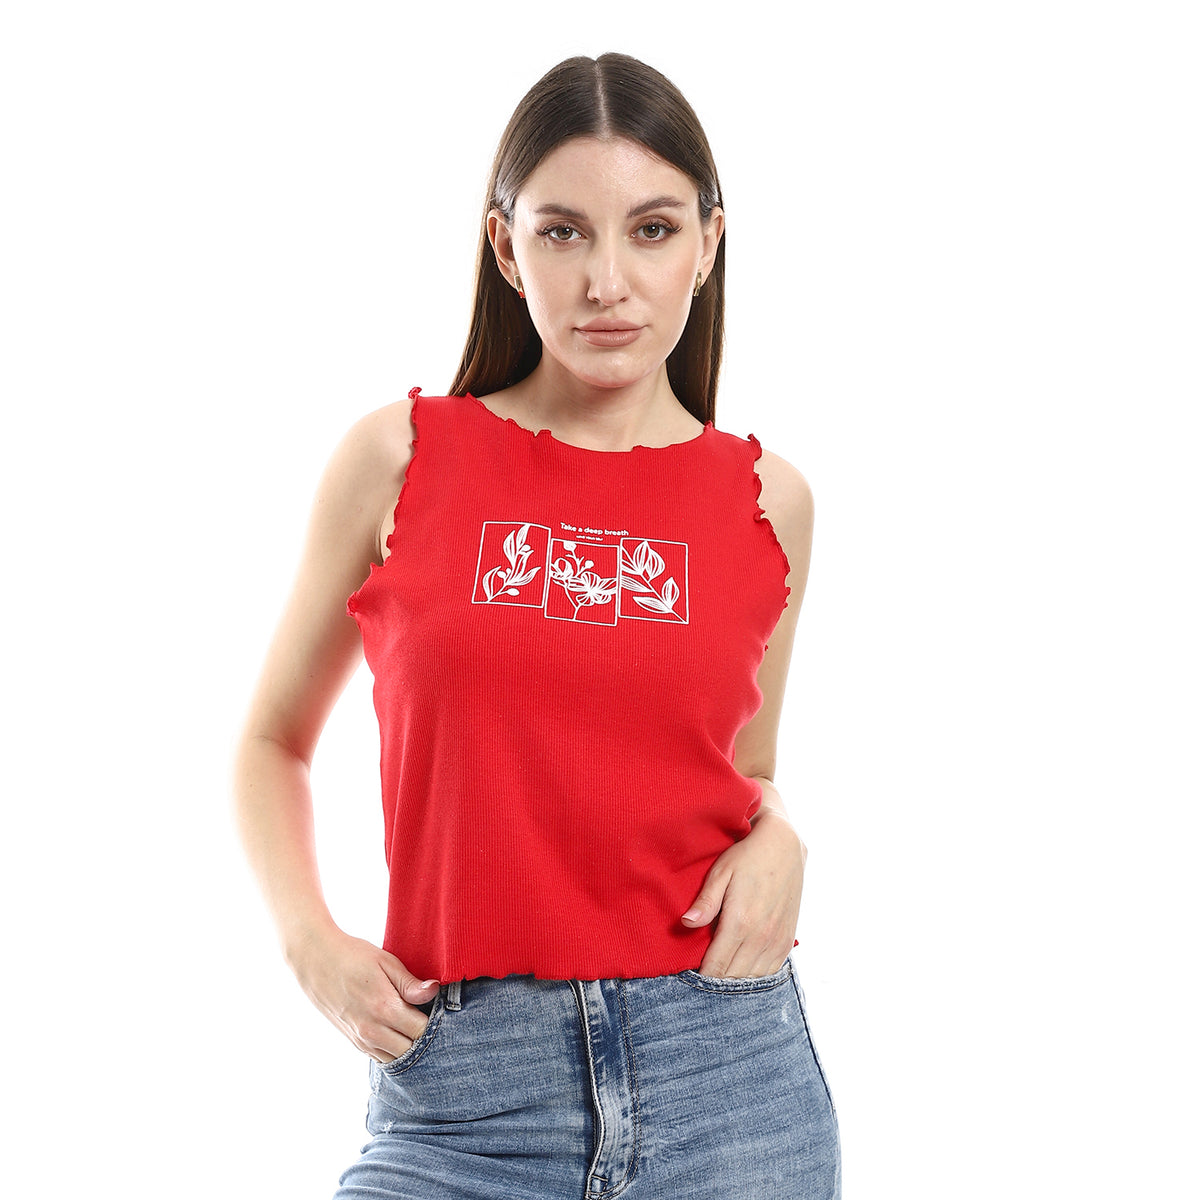 "Red Crop Top with Graphic Print"